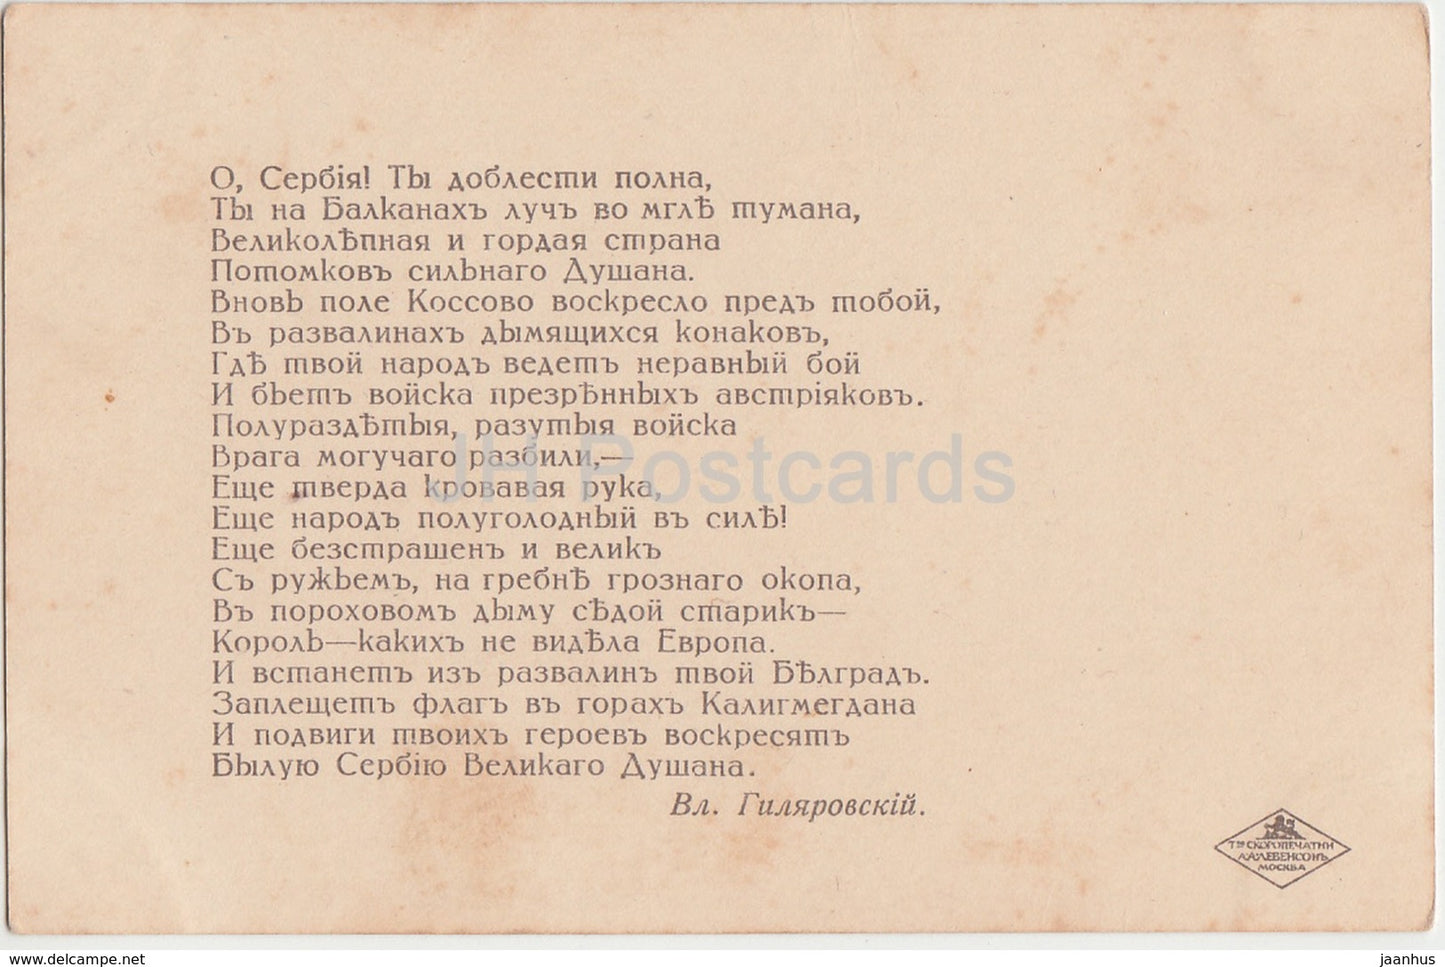 Lyrics by V. Gilyarovsky - Russia and Serbia together - charity - coat of arms - old postcard - Imperial Russia- unused